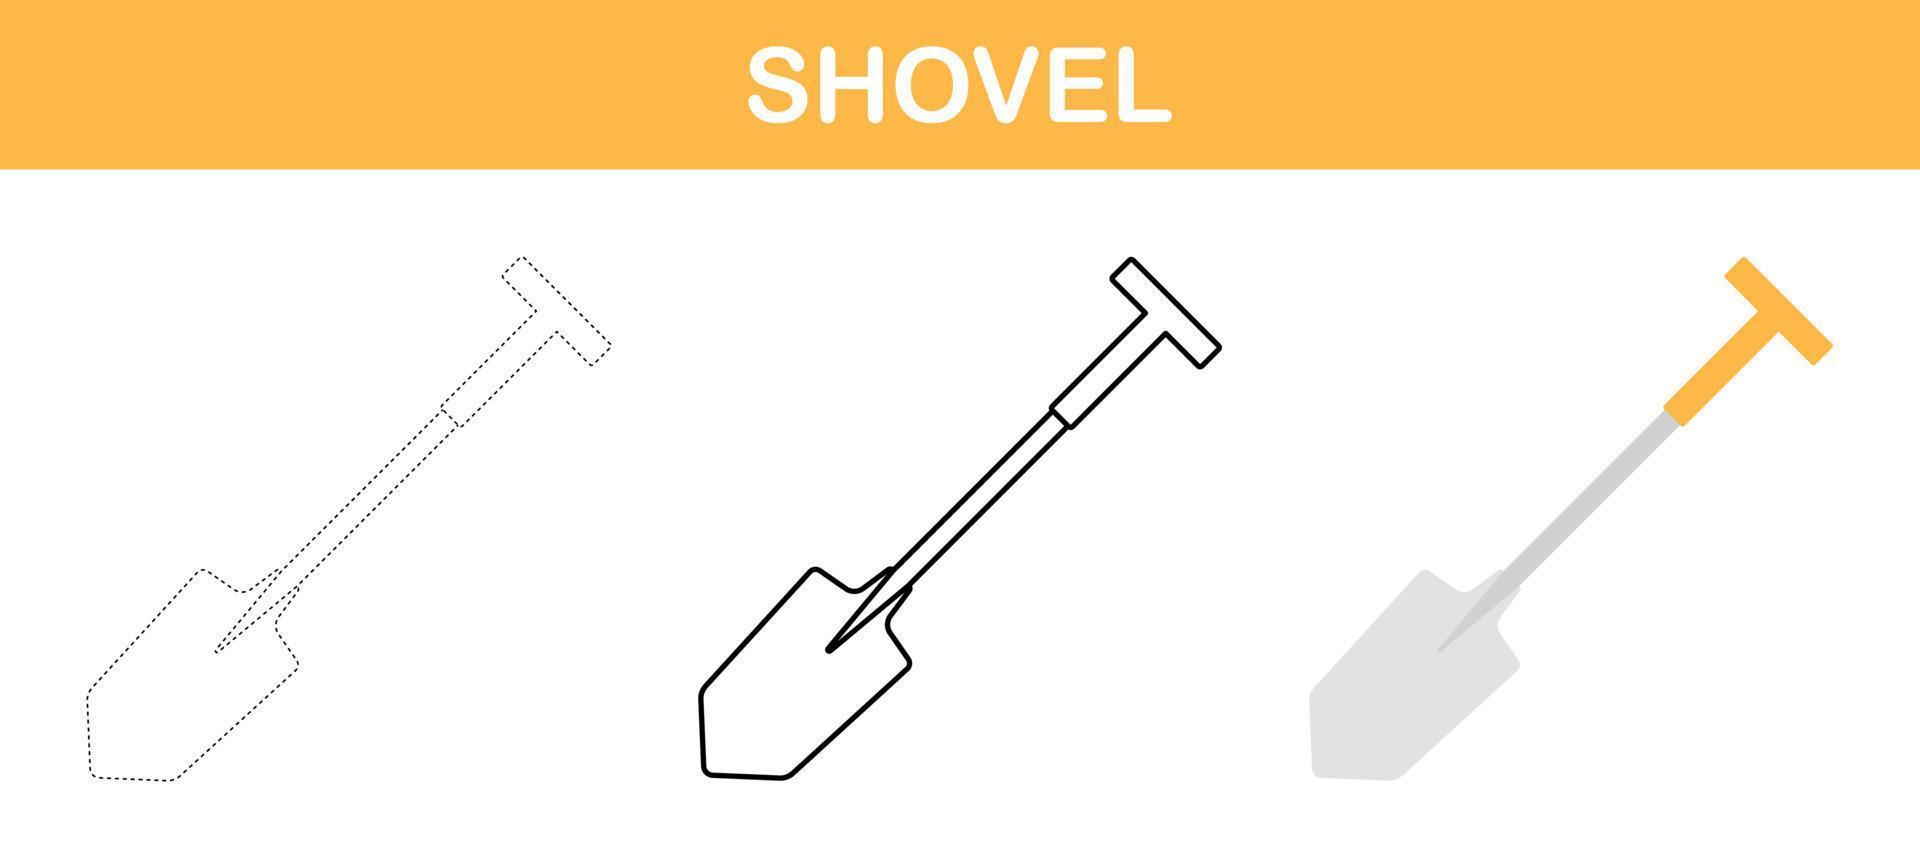 Shovel tracing and coloring worksheet for kids vector